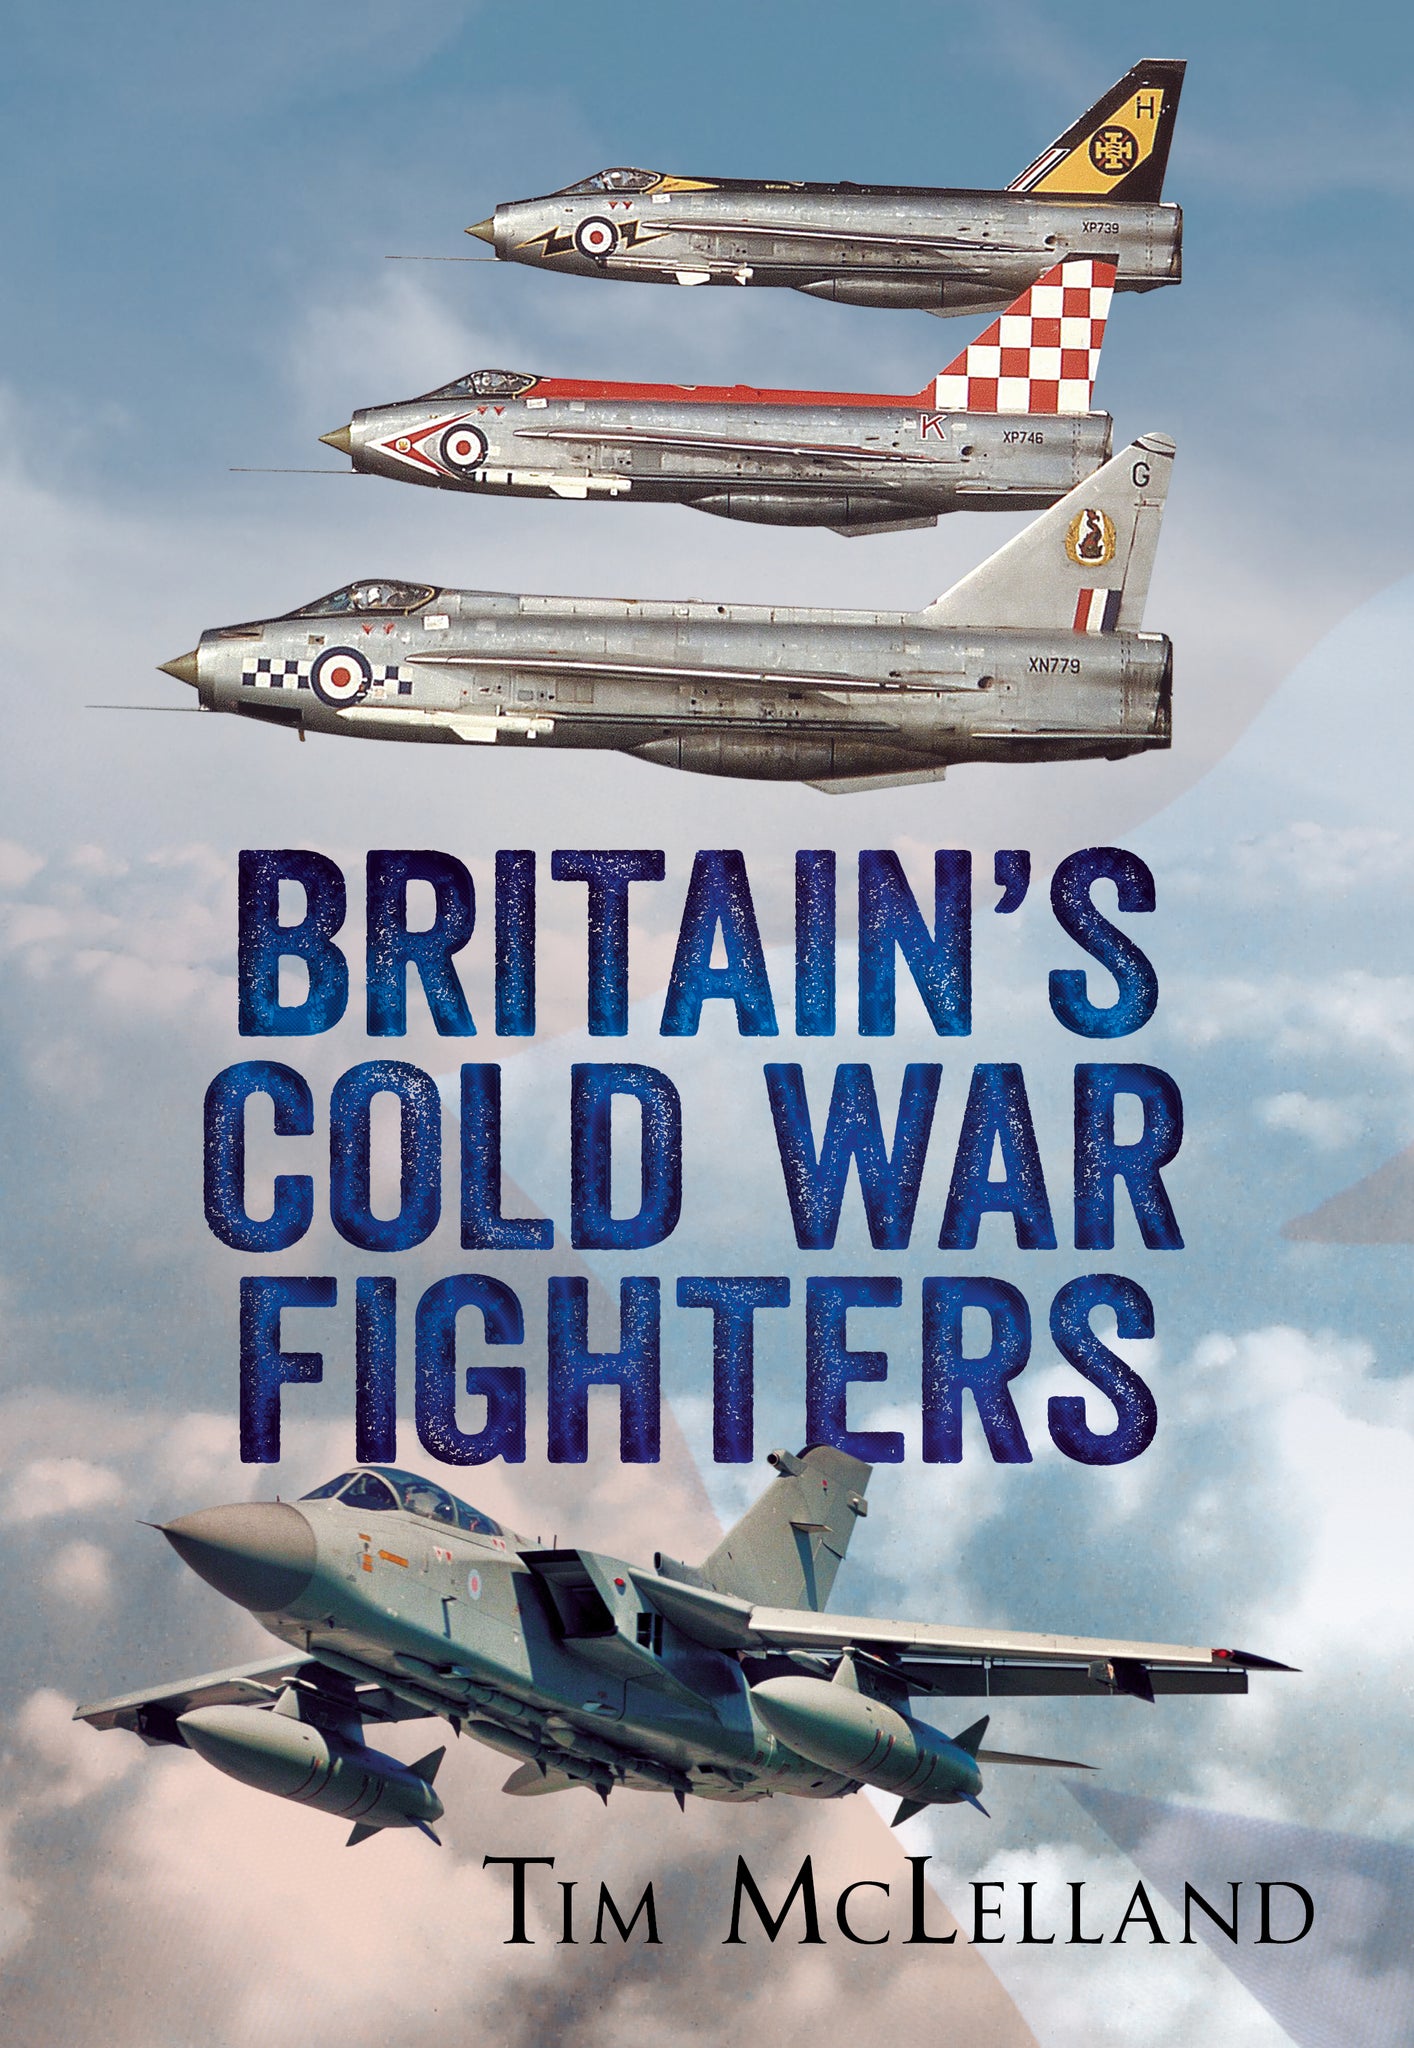 Britain's Cold War Fighters - available now from Fonthill Media